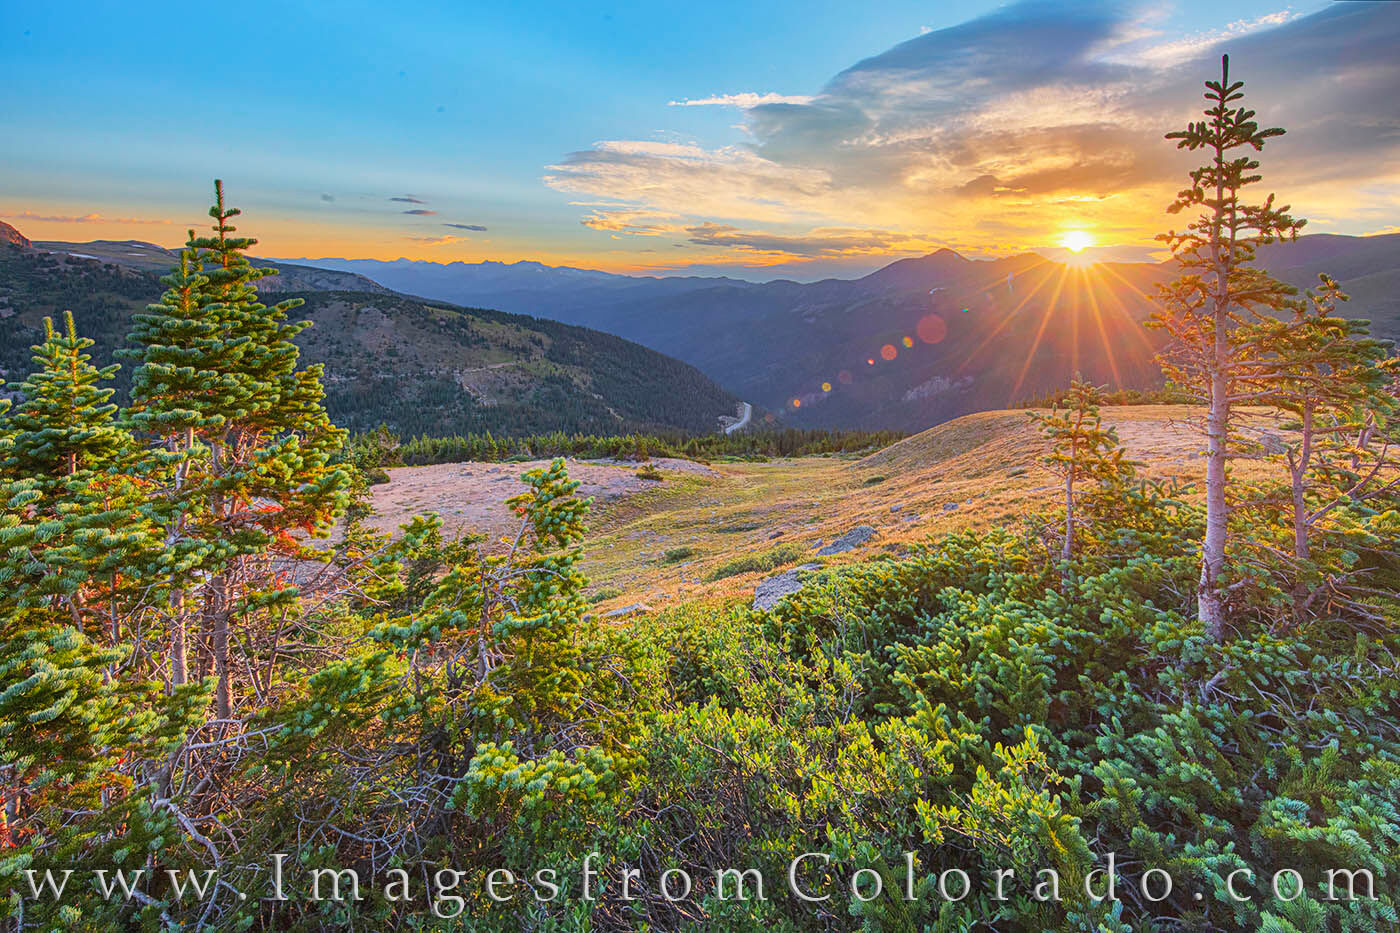 Sunrise comes to the Continental Divide Trail high up on Berthoud Pass.